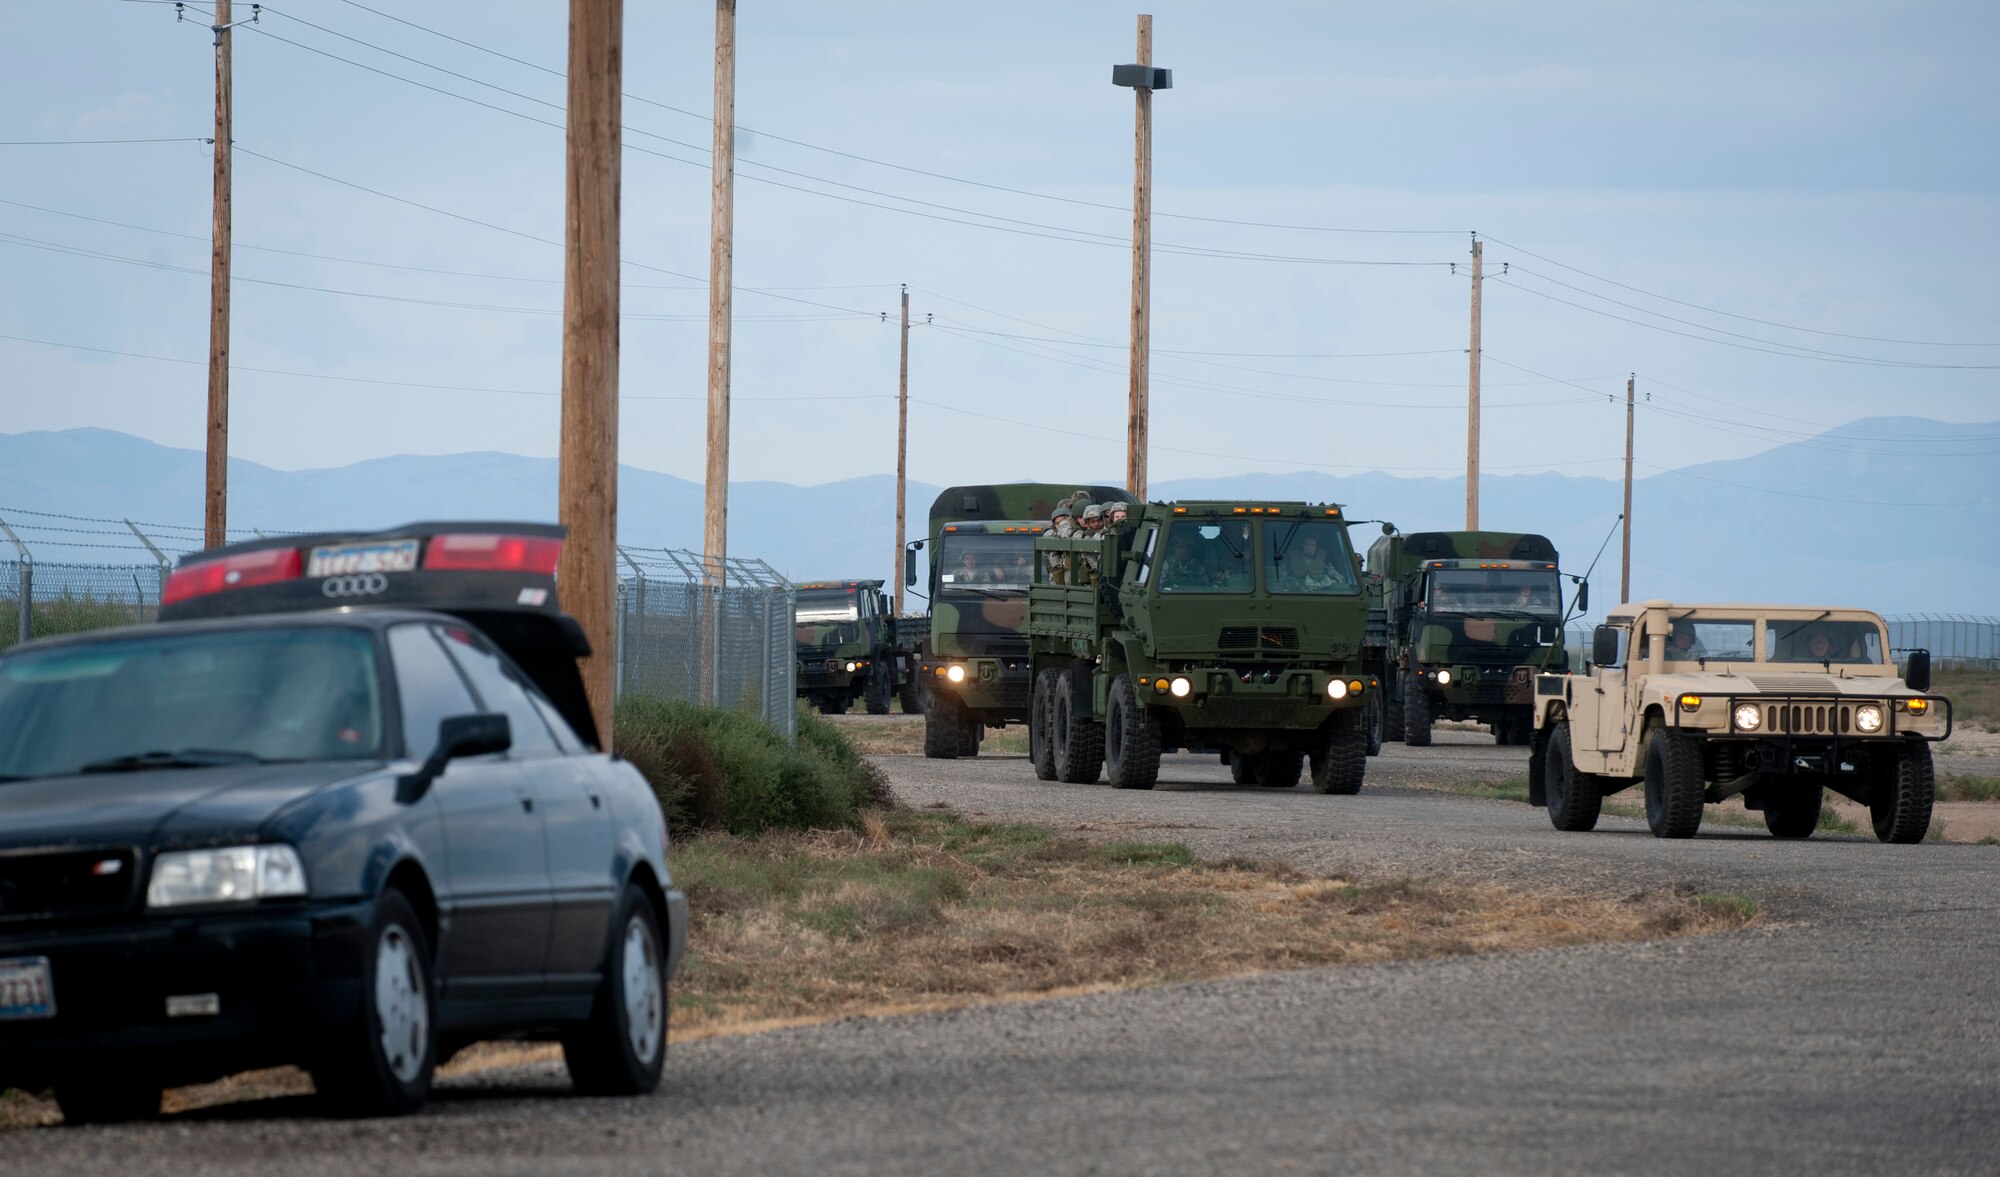 U.S. Air Force Airmen from the 726th Air Control Squadron ride in vehicles during a convoy to the mobile operating air base Sept. 17, 2013, at Mountain Home Air Force Base, Idaho. Convoy practice trains Airmen to be aware of their surroundings when safely moving from point to point. During the convoys, teams encounter many scenarios such as a vehicle born improvised explosive device. (U.S. Air Force photo by Airman 1st Class Brittany A. Chase/Released)